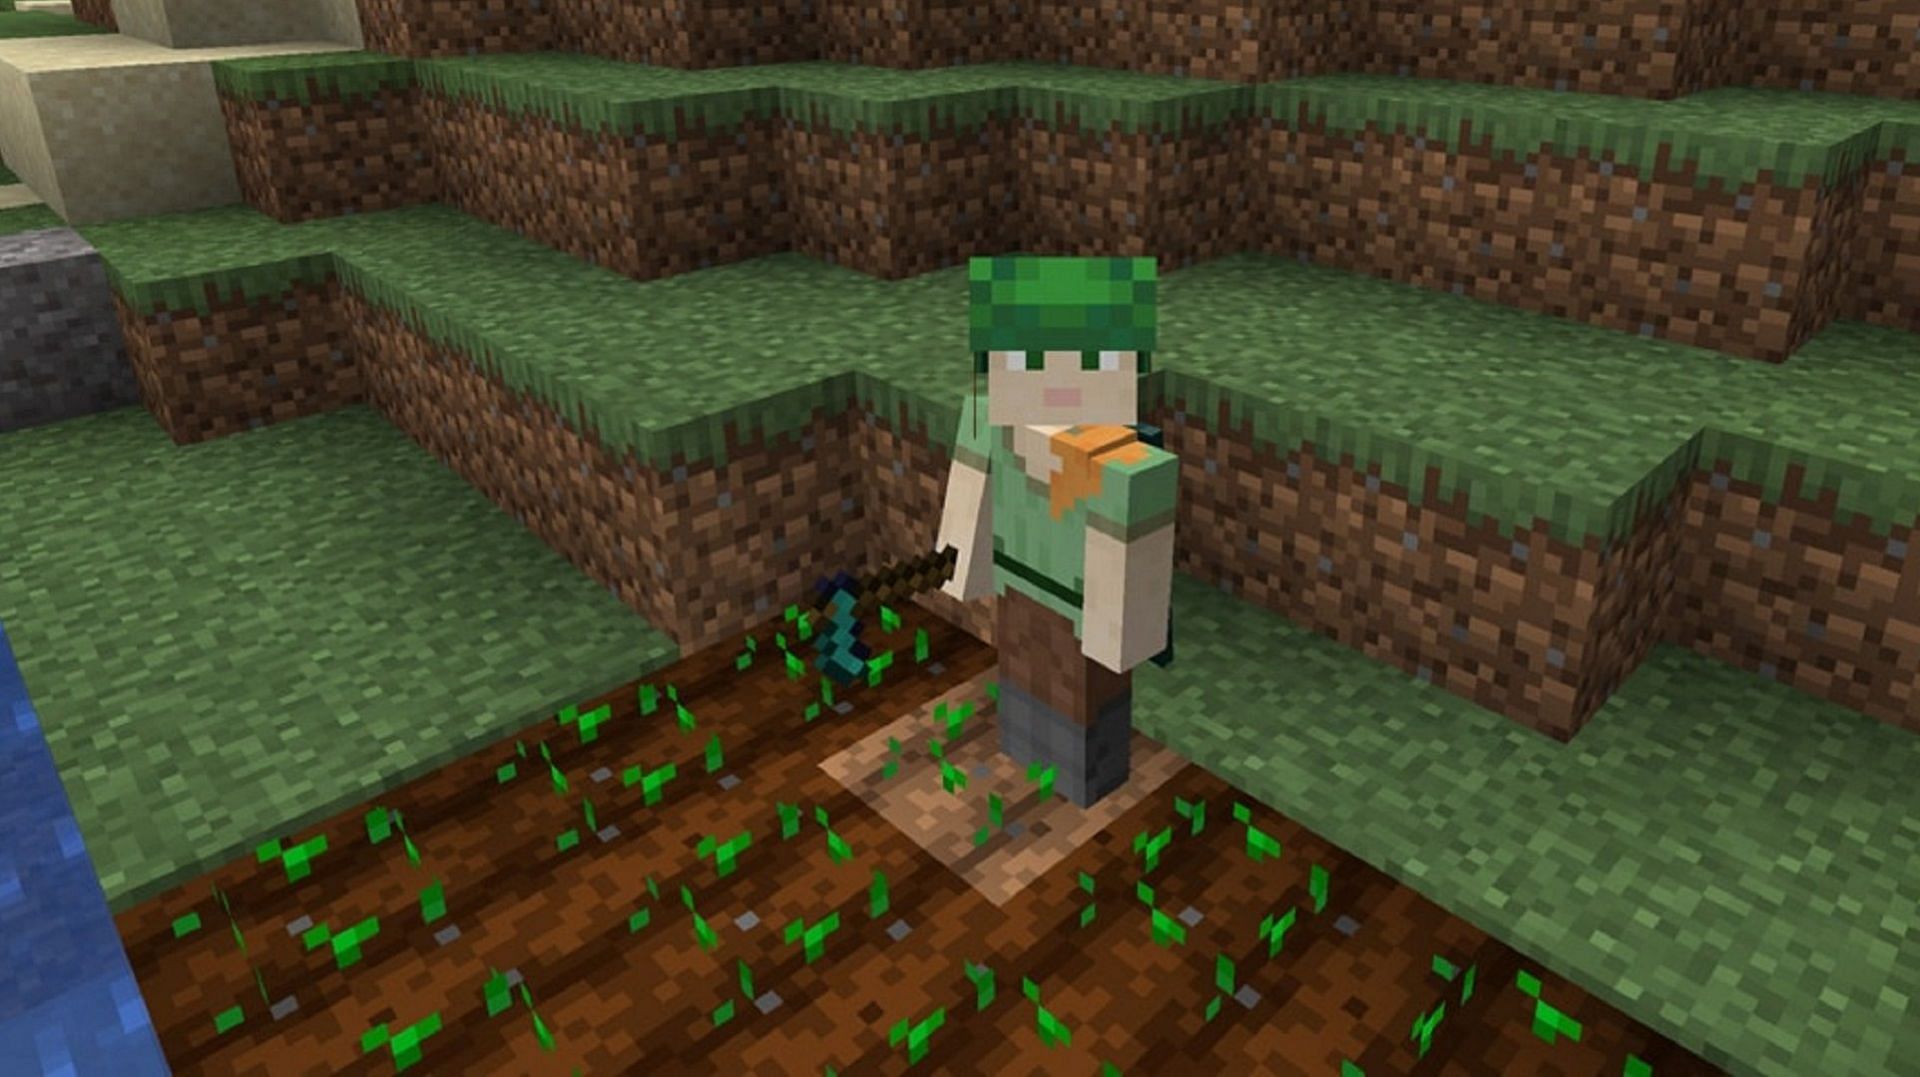 Hoes in Minecraft are the ideal tools for farming crops (Image via Minecraft.net)